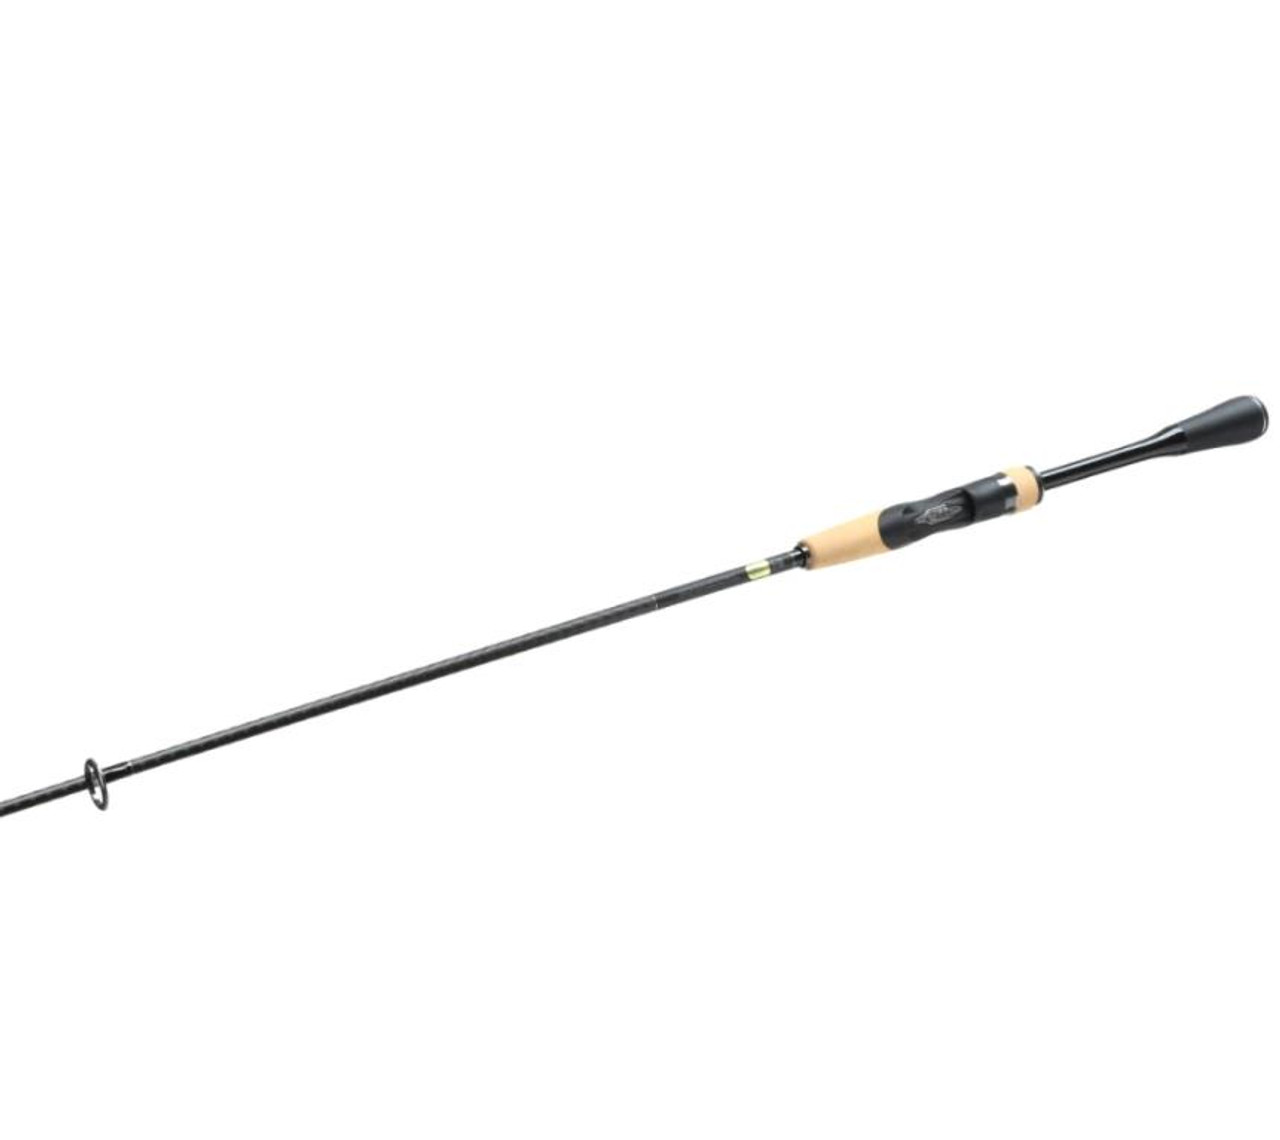 Shimano Expride Casting Rod - 7'2 - Heavy - Dance's Sporting Goods